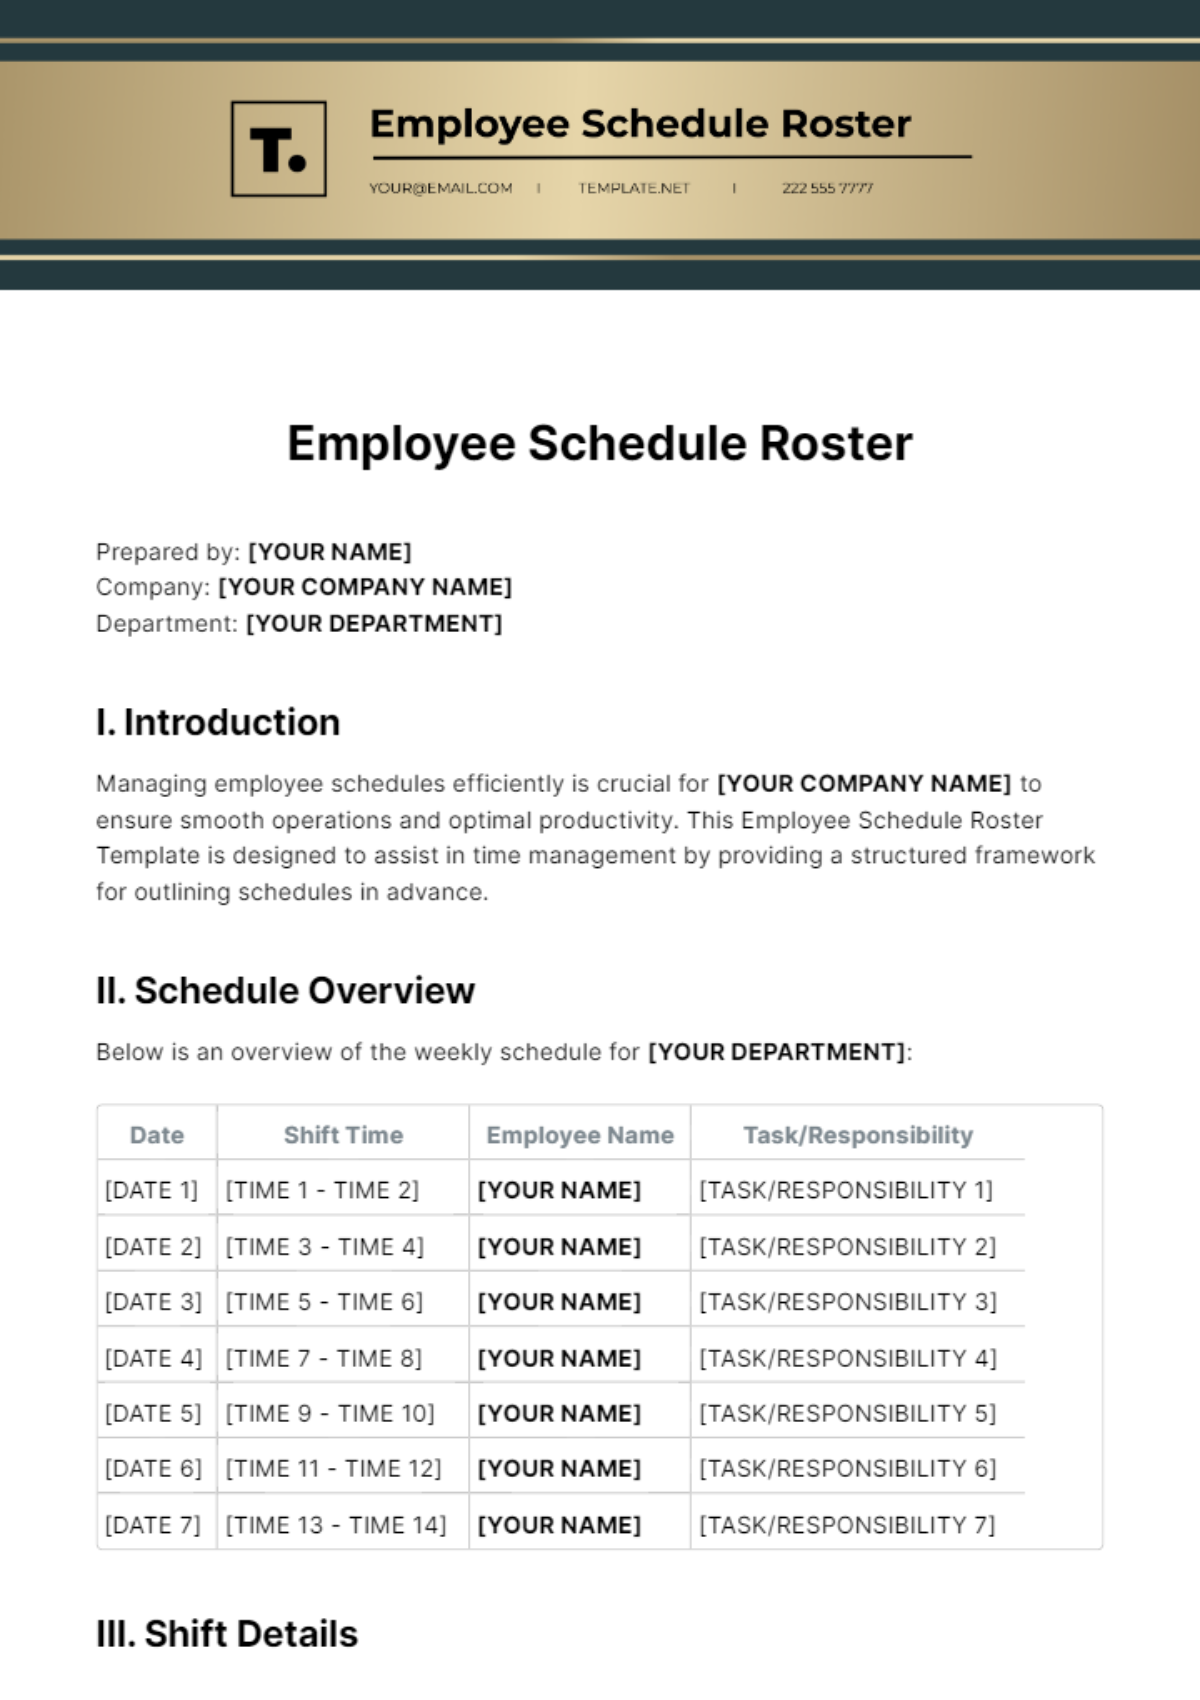 Free Employee Schedule Roster Template